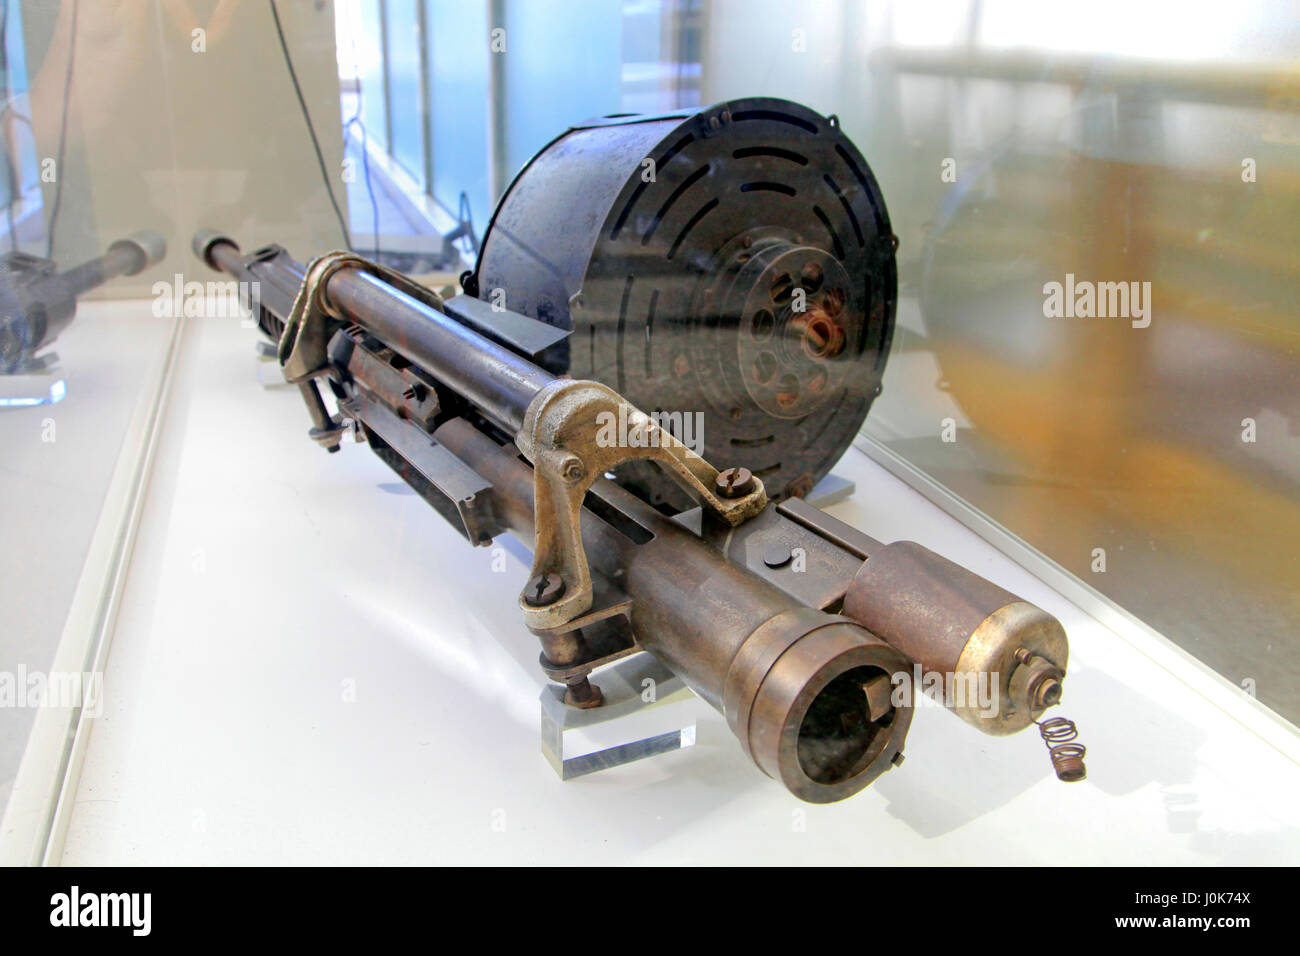 20 mm Cannon of A6M Zero Fighter Aircraft Stock Photo